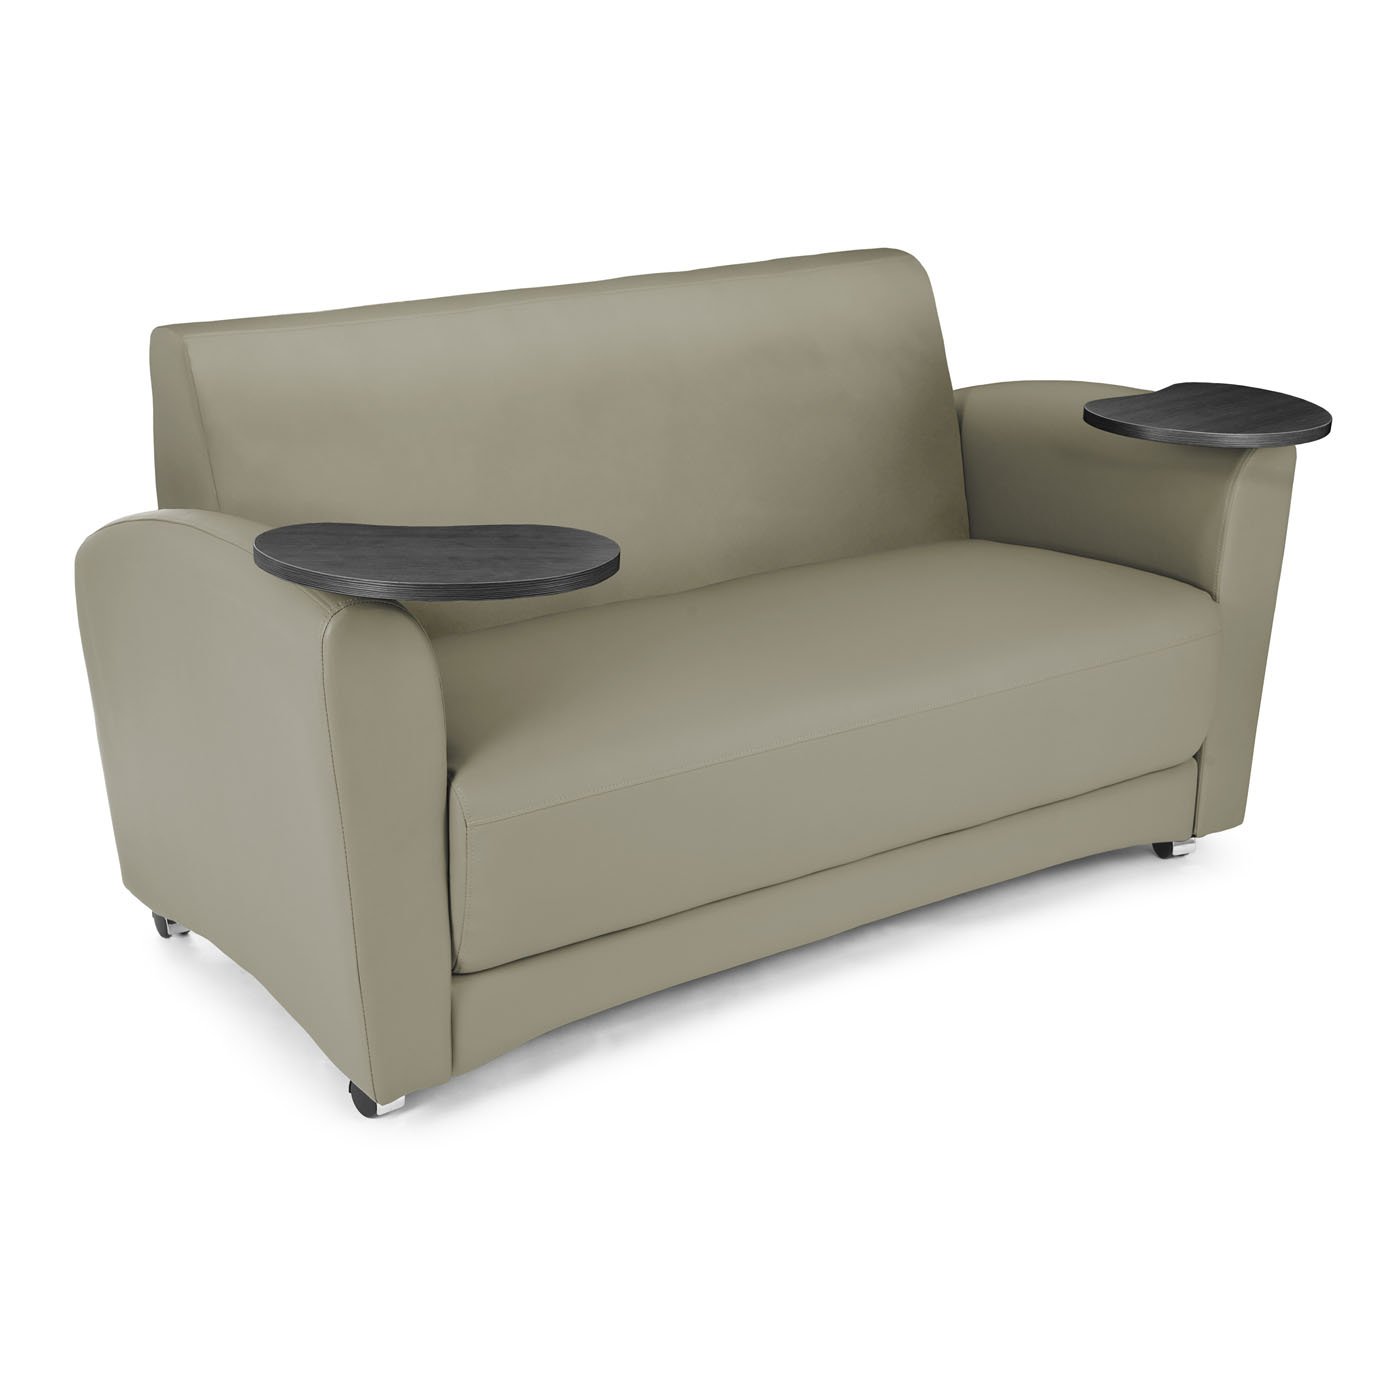 OFM 822 Interplay Sofa With Free Shipping!